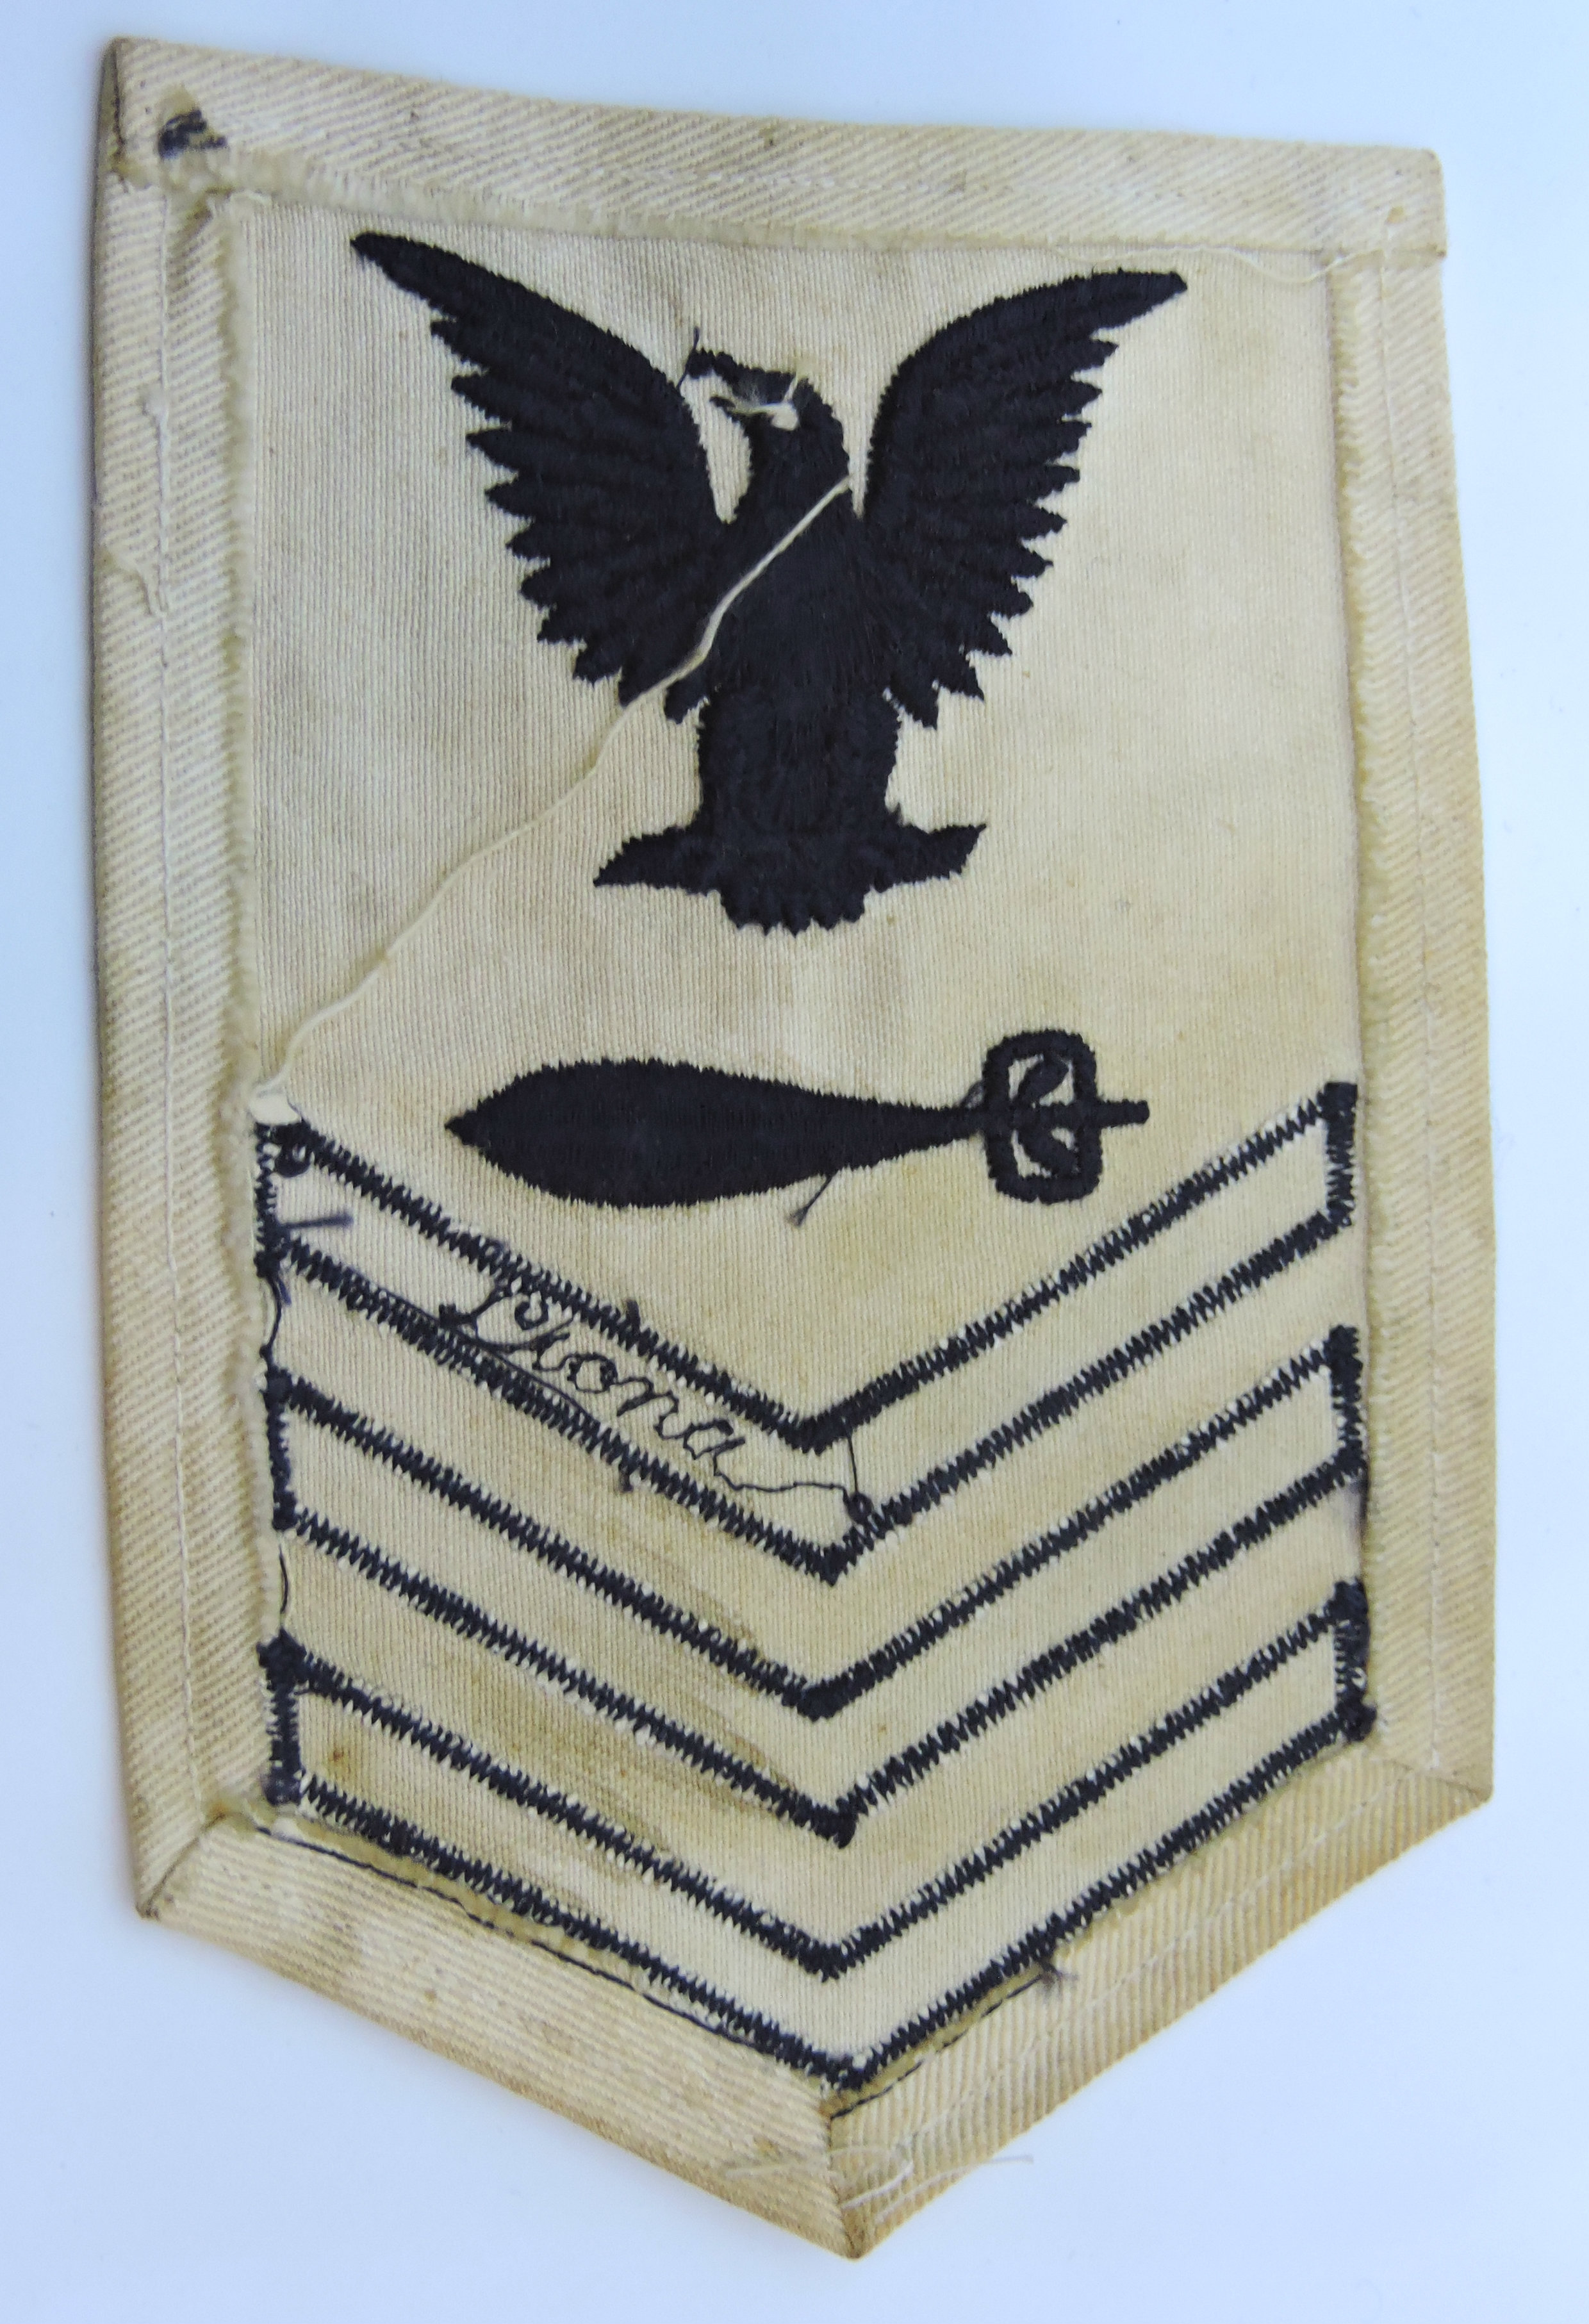 Sleeve rate Petty Officer 1st class   Torpedoman&#039;s Mate  WW2